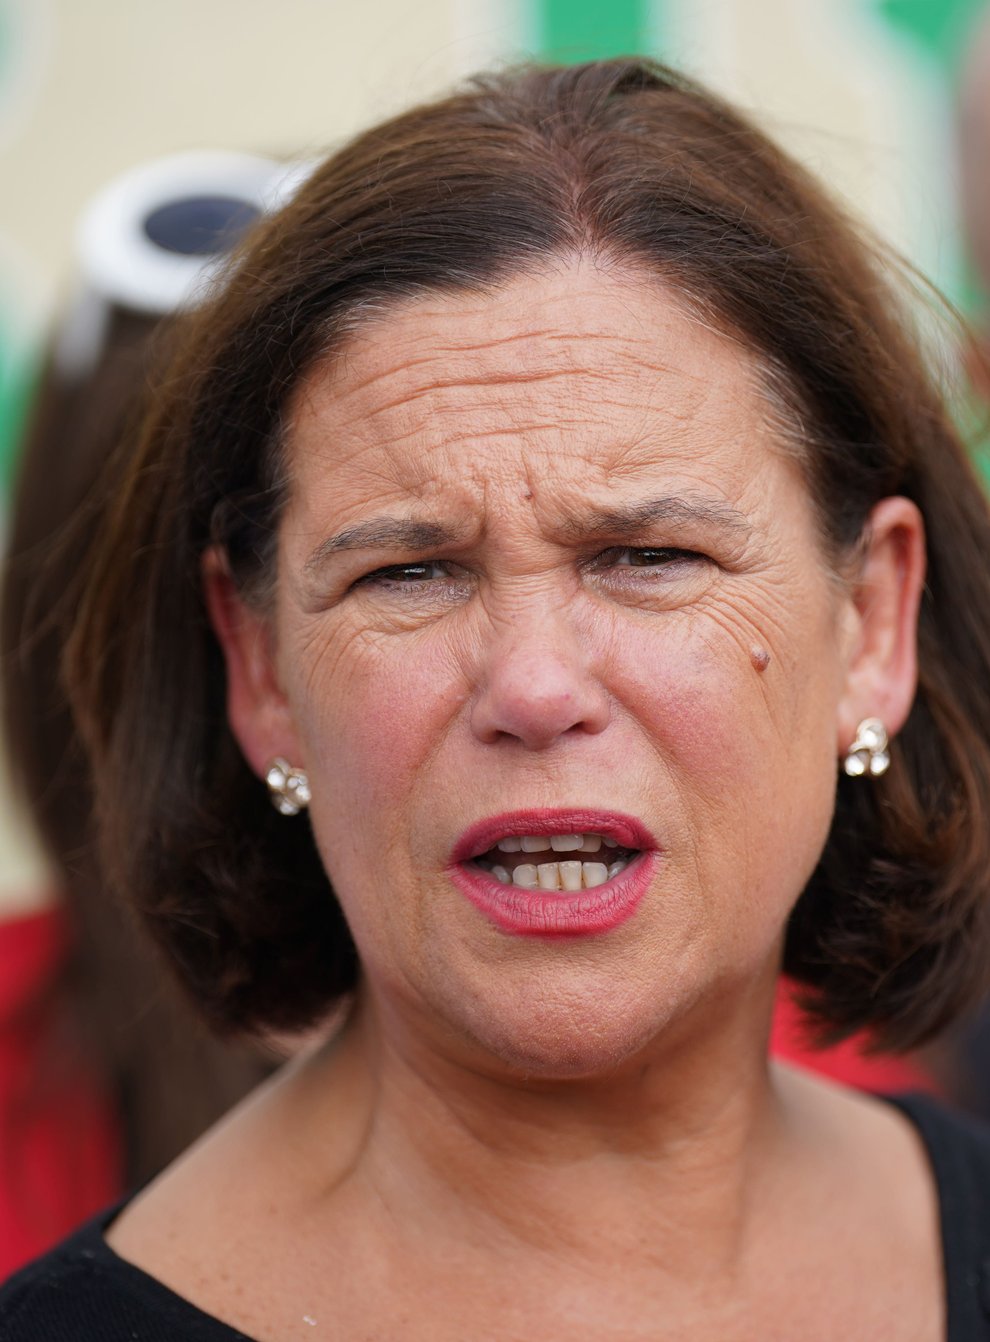 Sinn Fein Leader Mary Lou McDonald speaking to the media as she visited the National Ploughing Championships at Ratheniska Co Laois. Picture date: Wednesday September 21, 2022 (Brian Lawless/PA Wire)